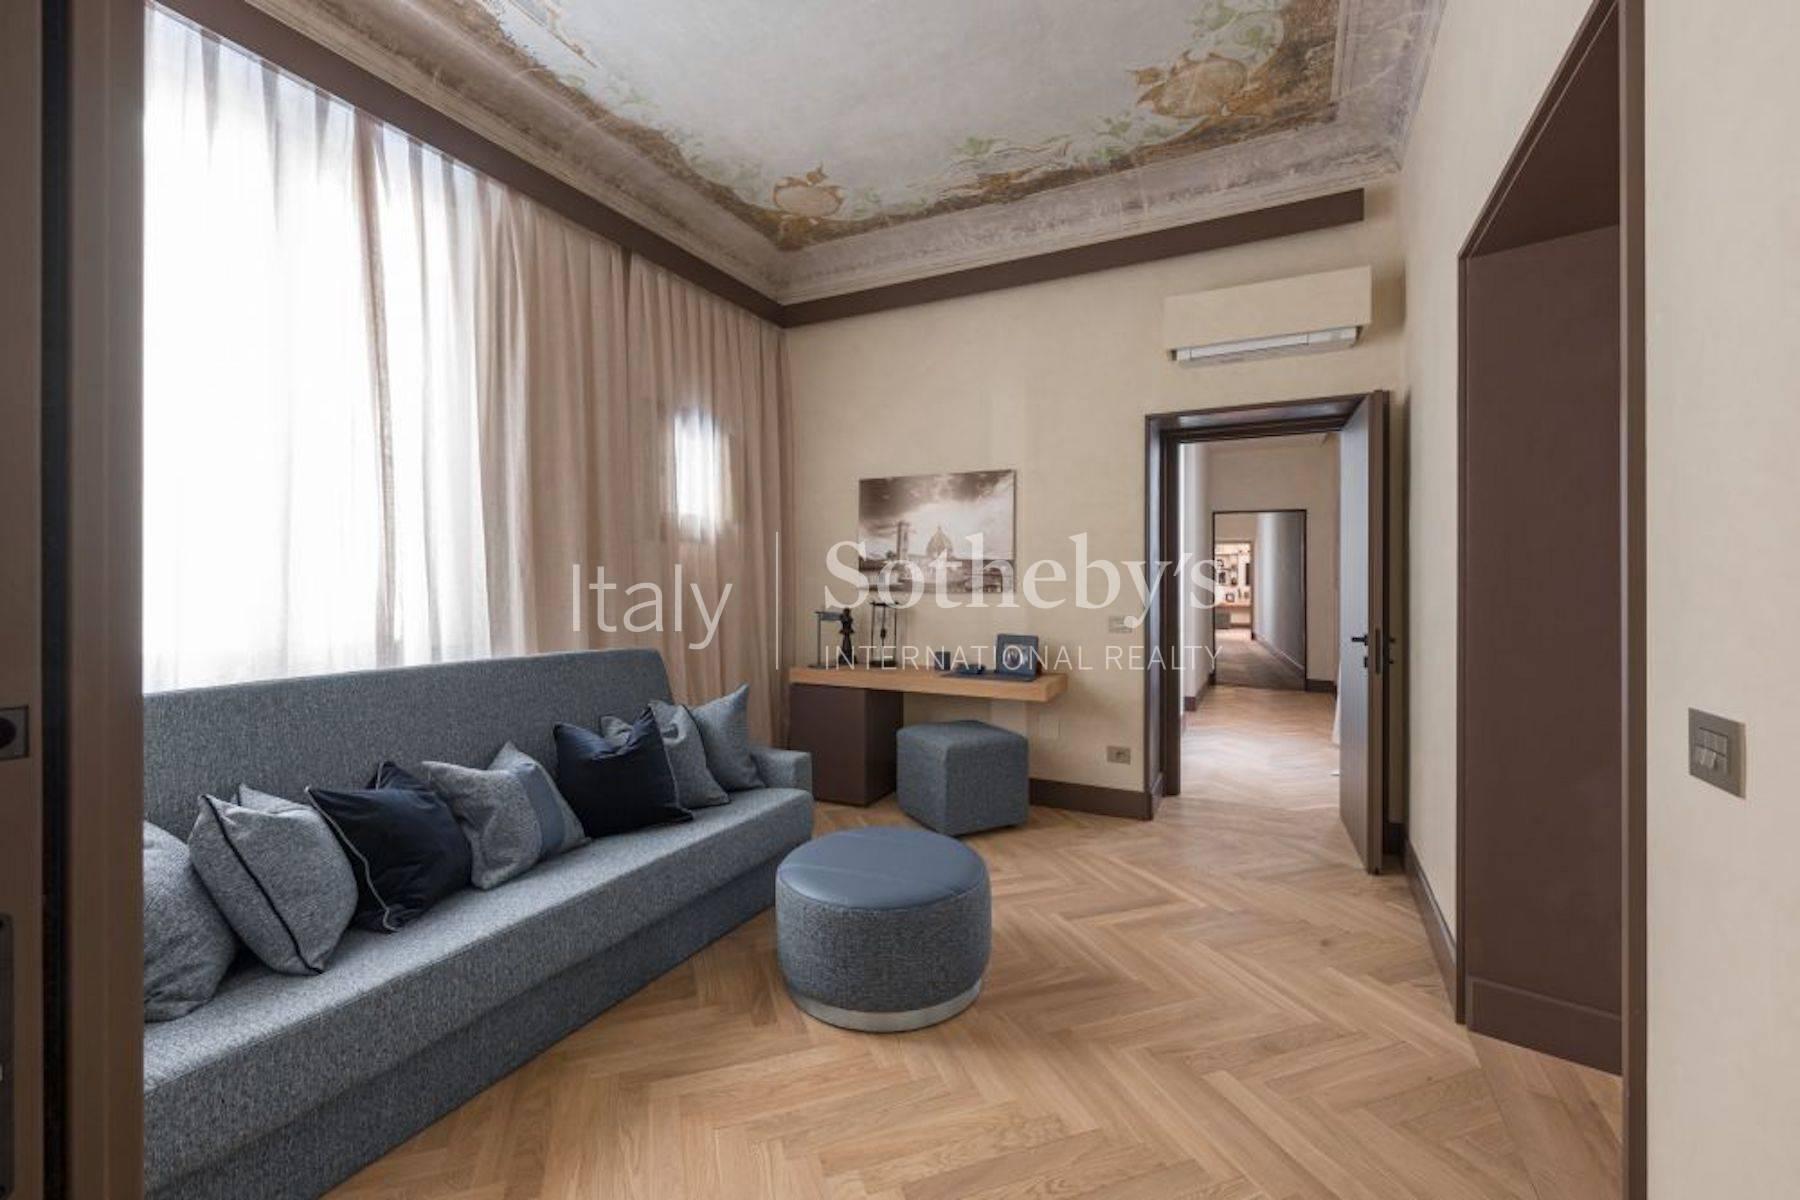 Mona Lisa apartment with courtyard in the heart of Florence - 4